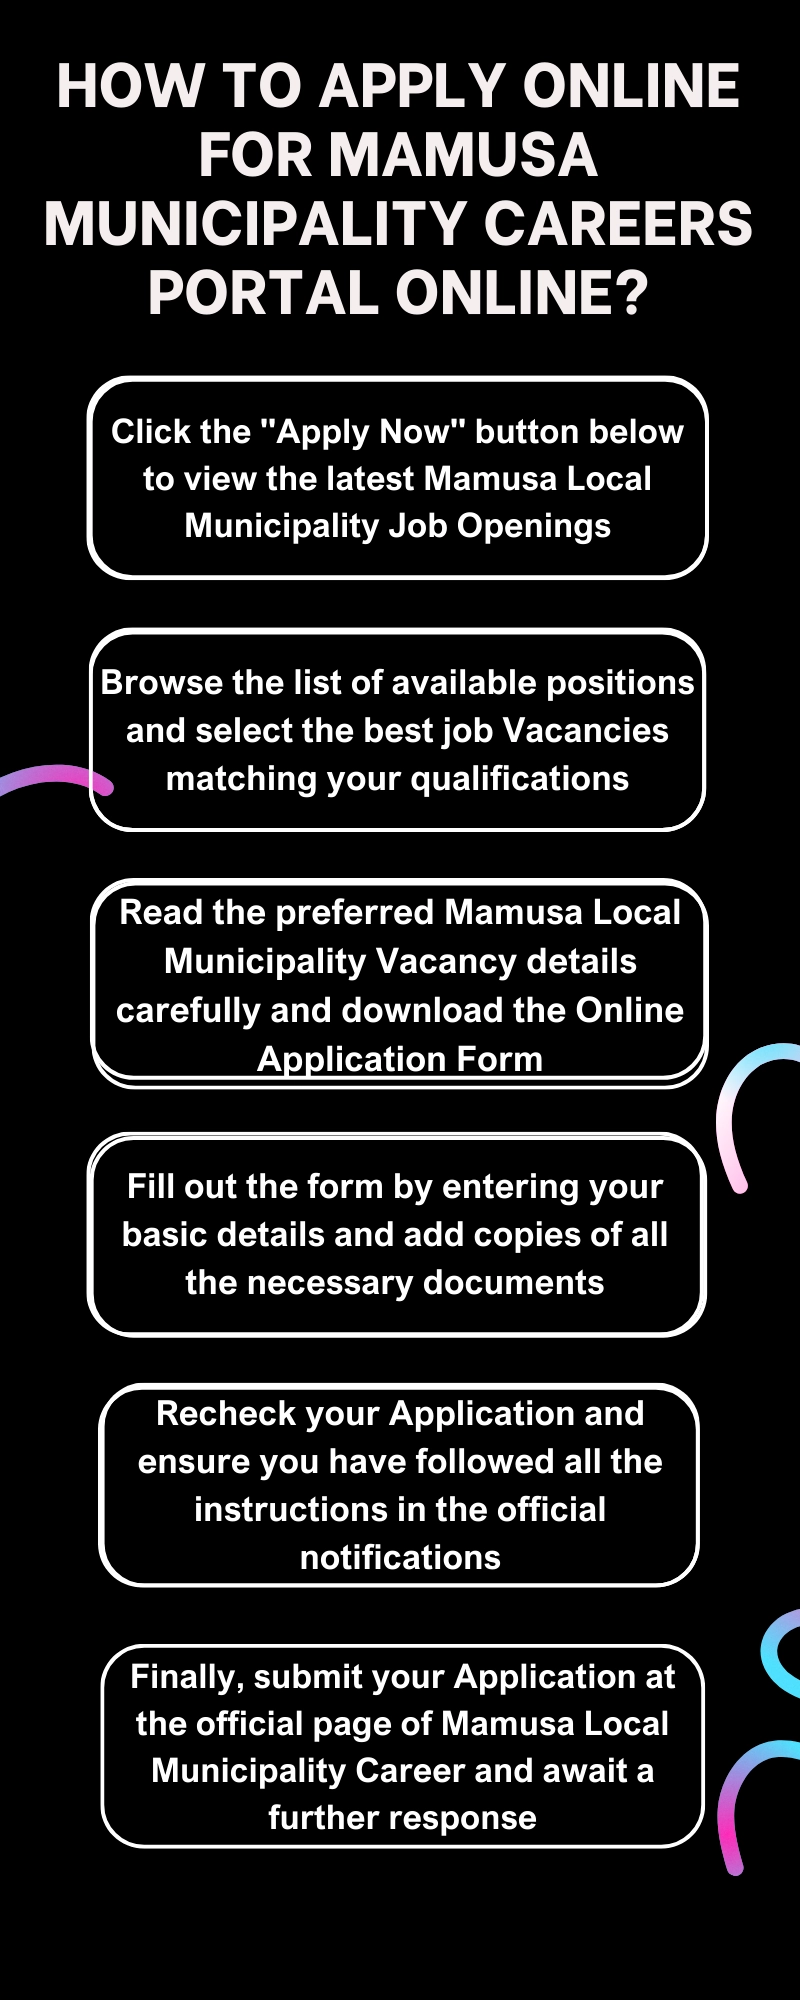 How to Apply online for Mamusa Municipality Careers Portal Online?